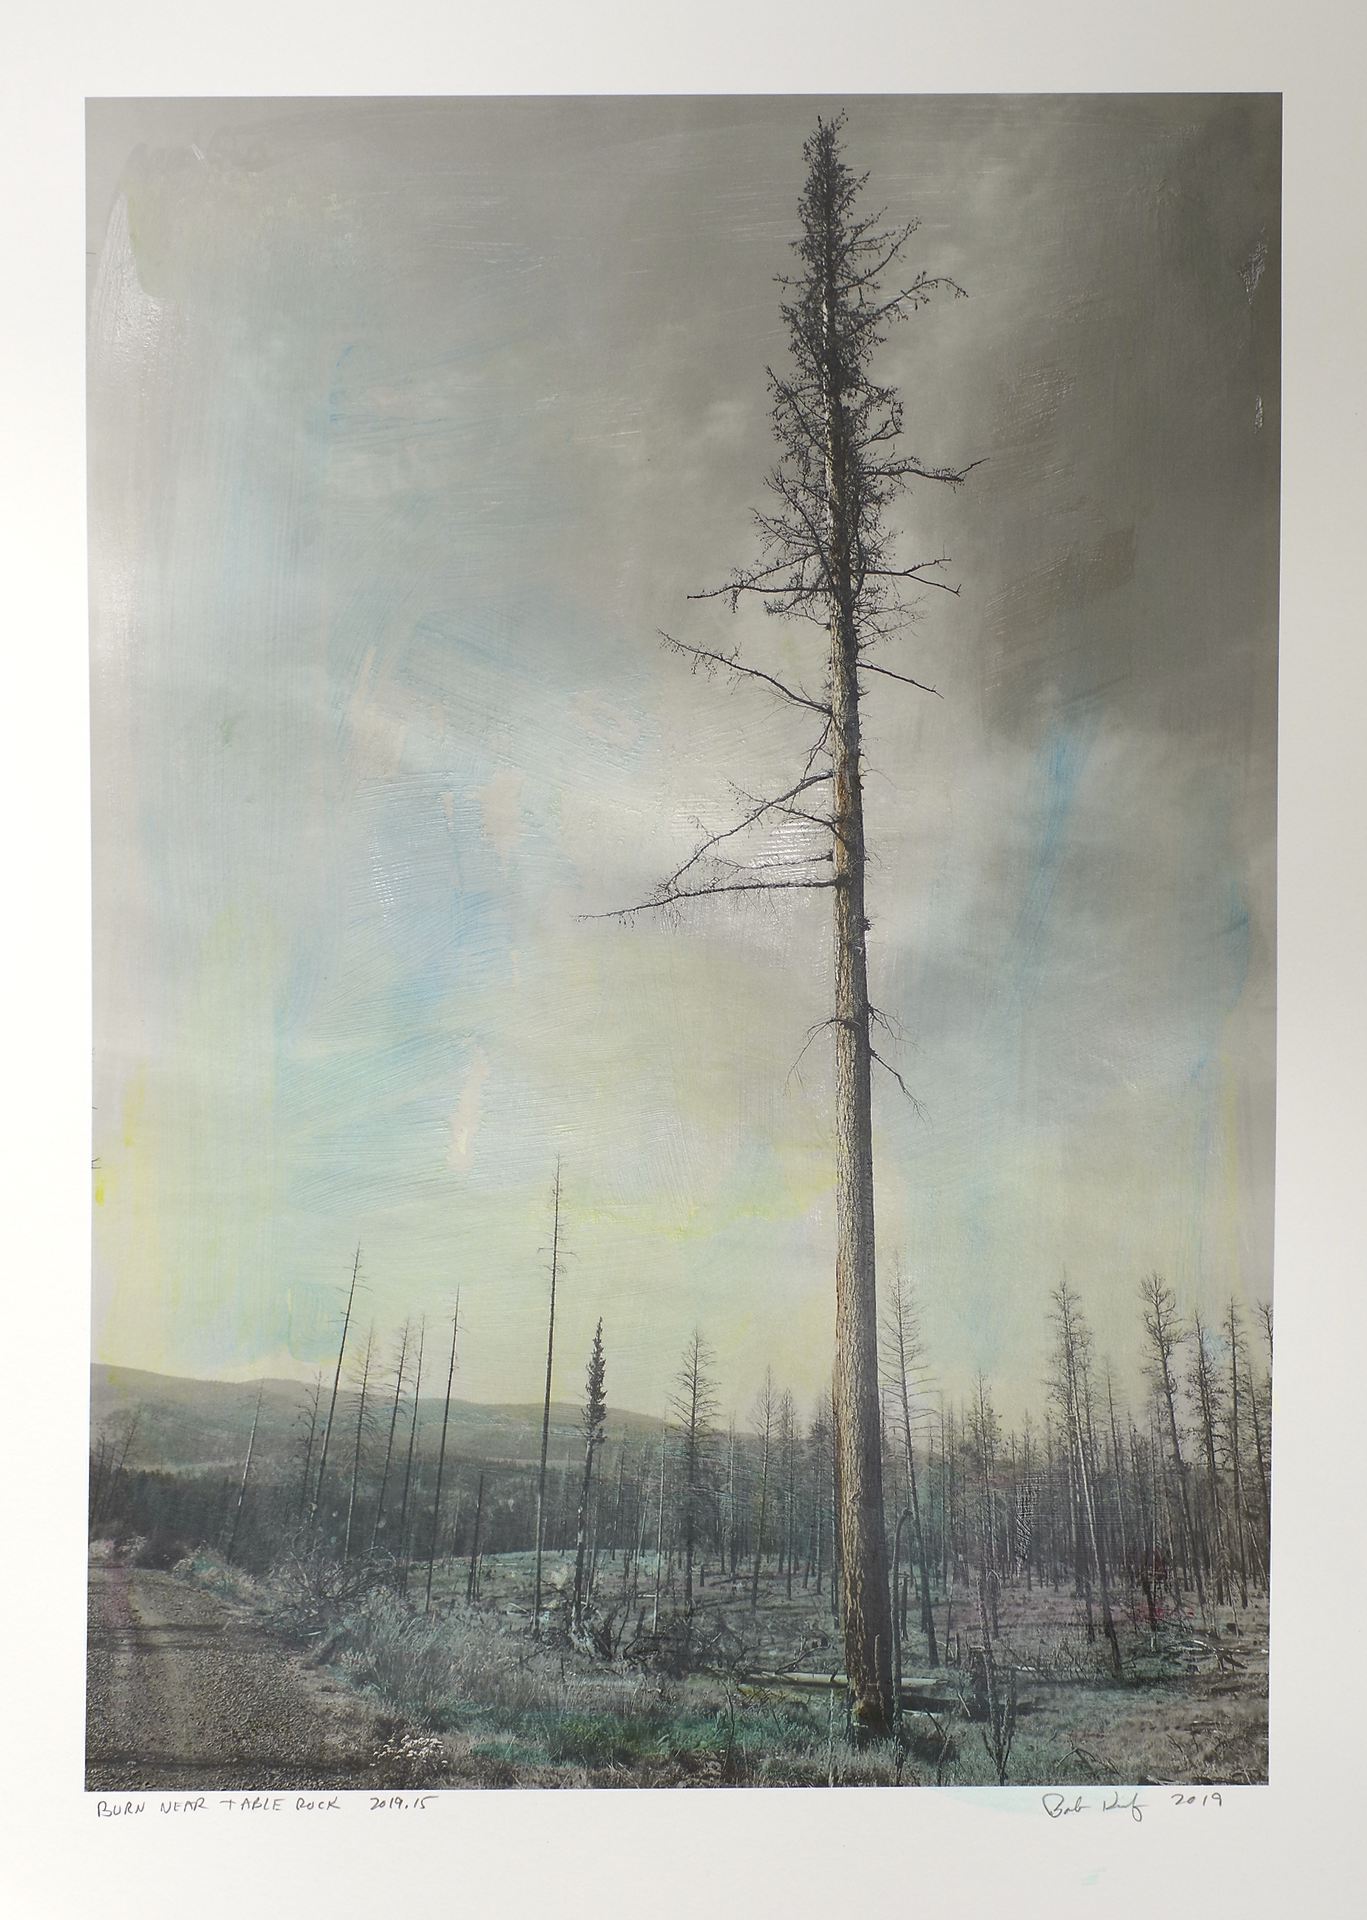 Hand colored photograph of a burned forest